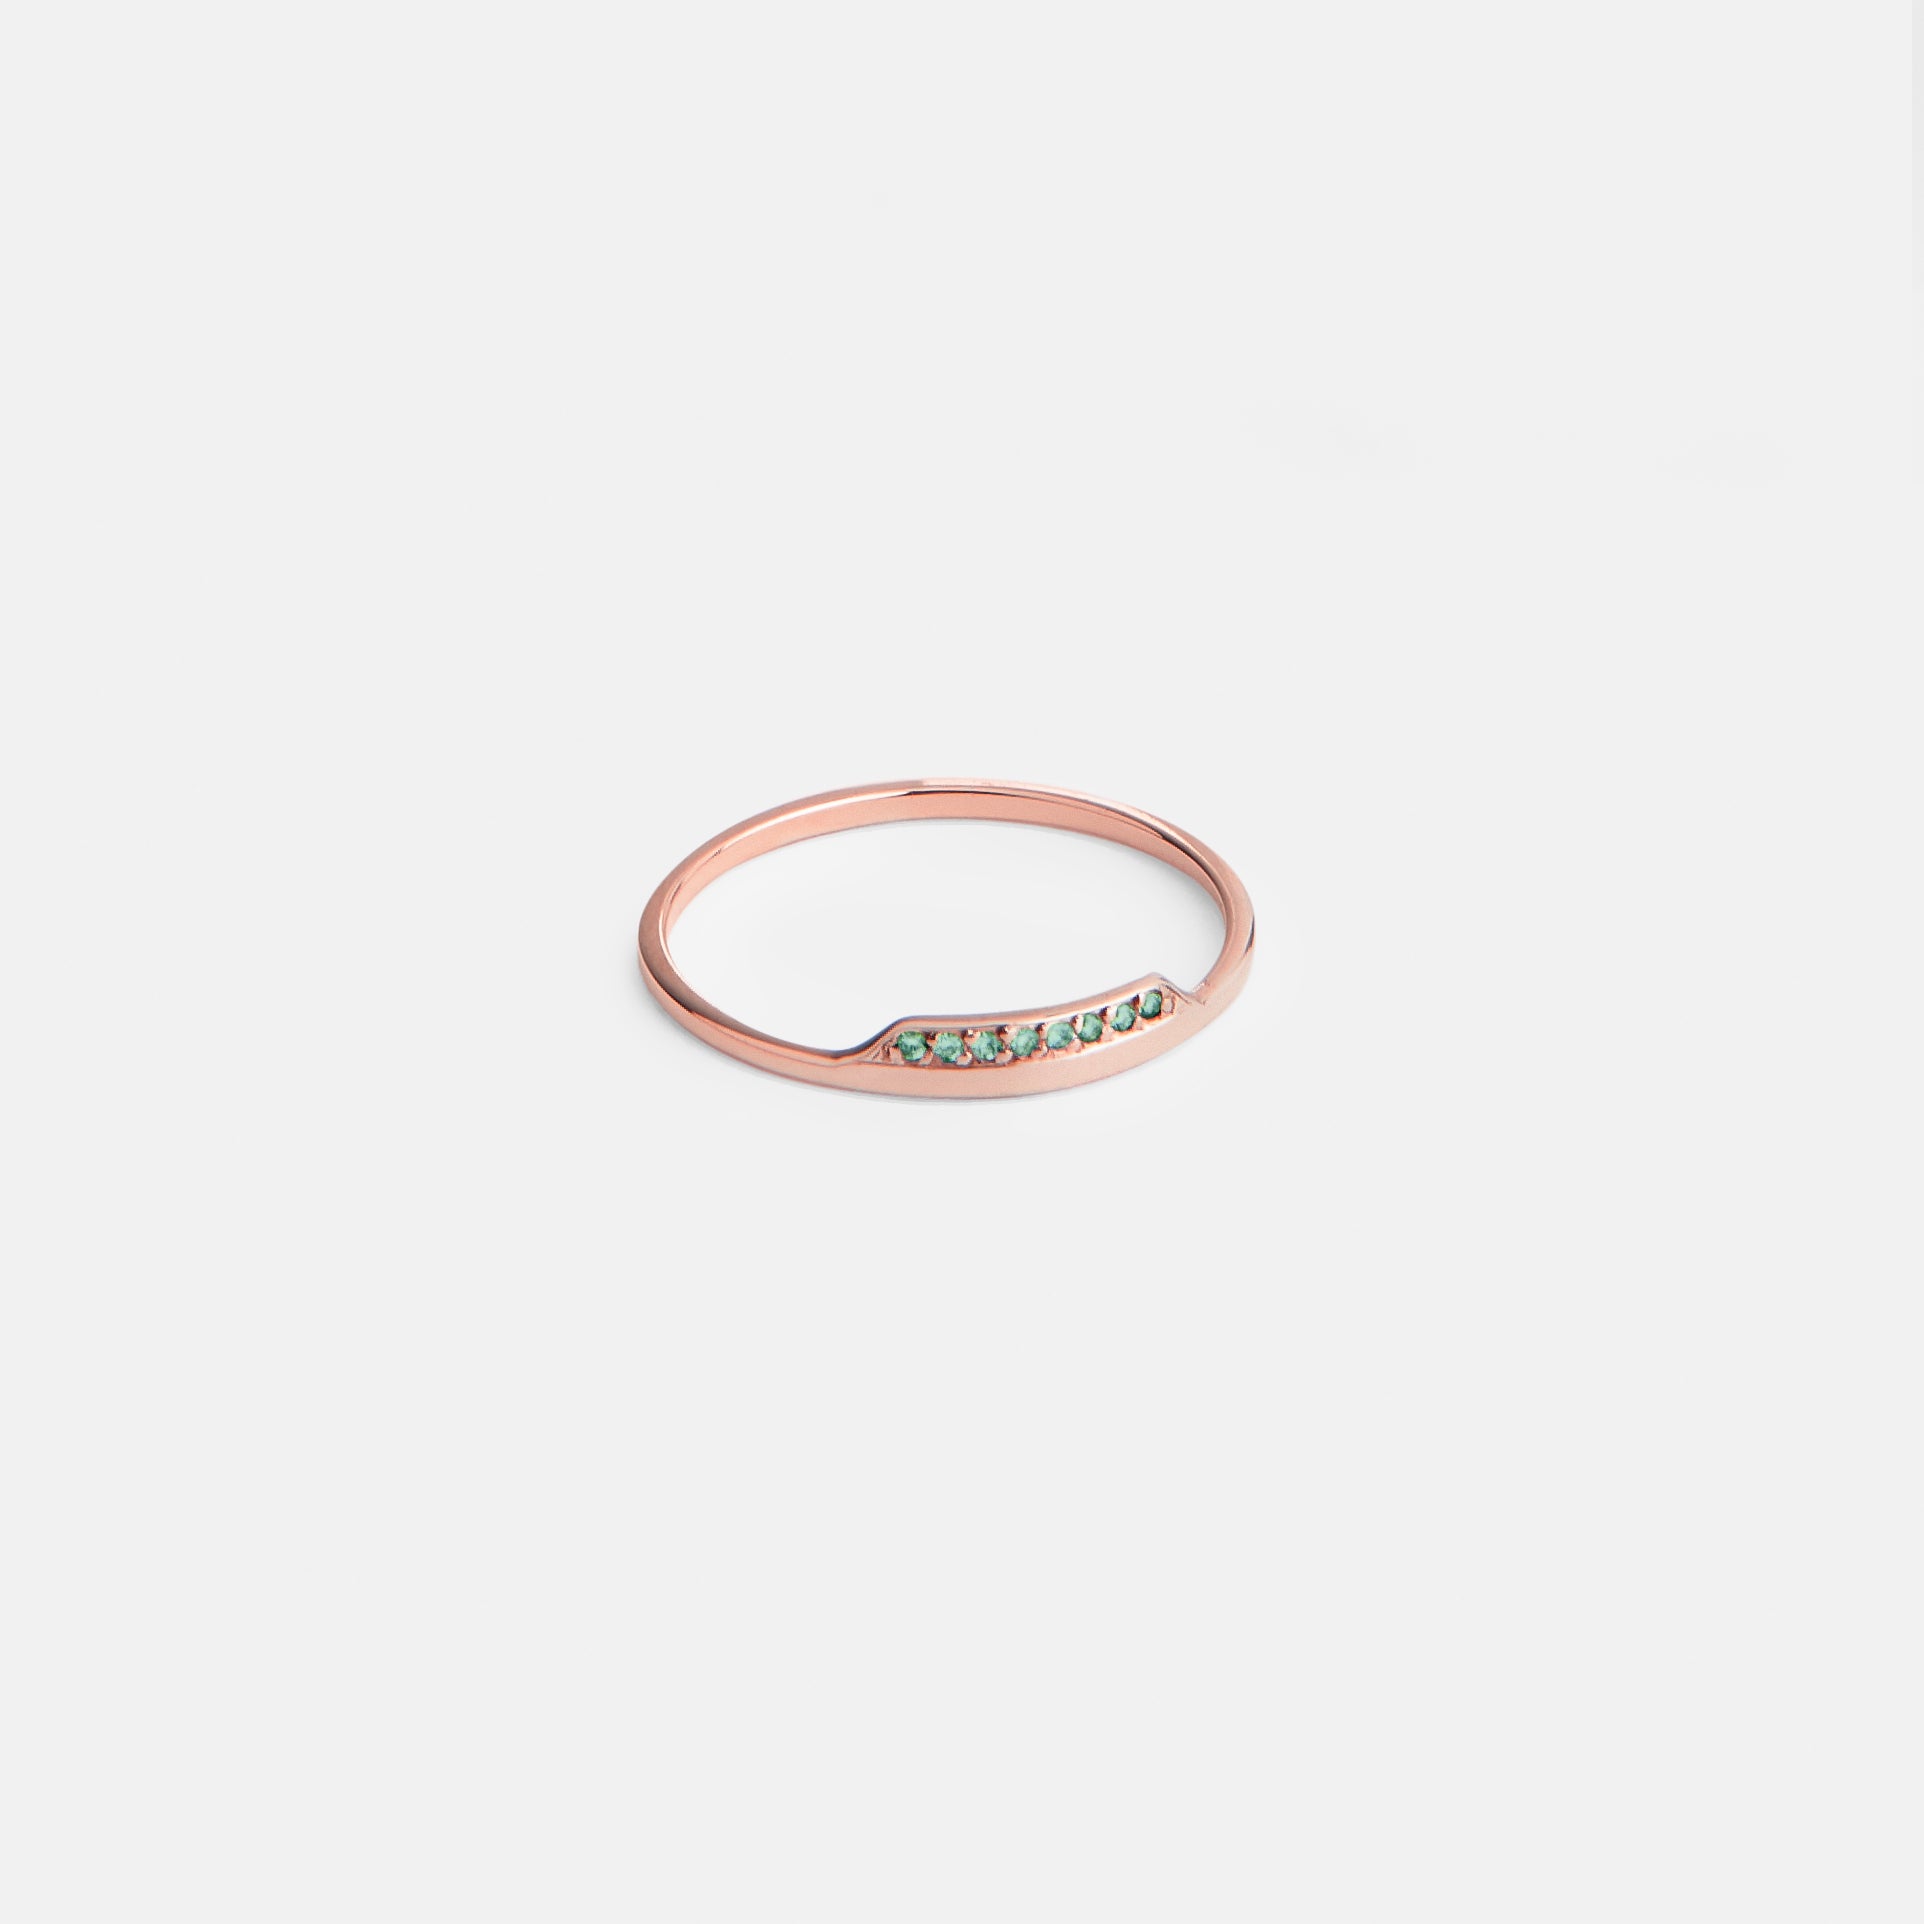 Salo Thin Ring in 14k Rose Gold set with Green  Diamonds By SHW Fine Jewelry NYC